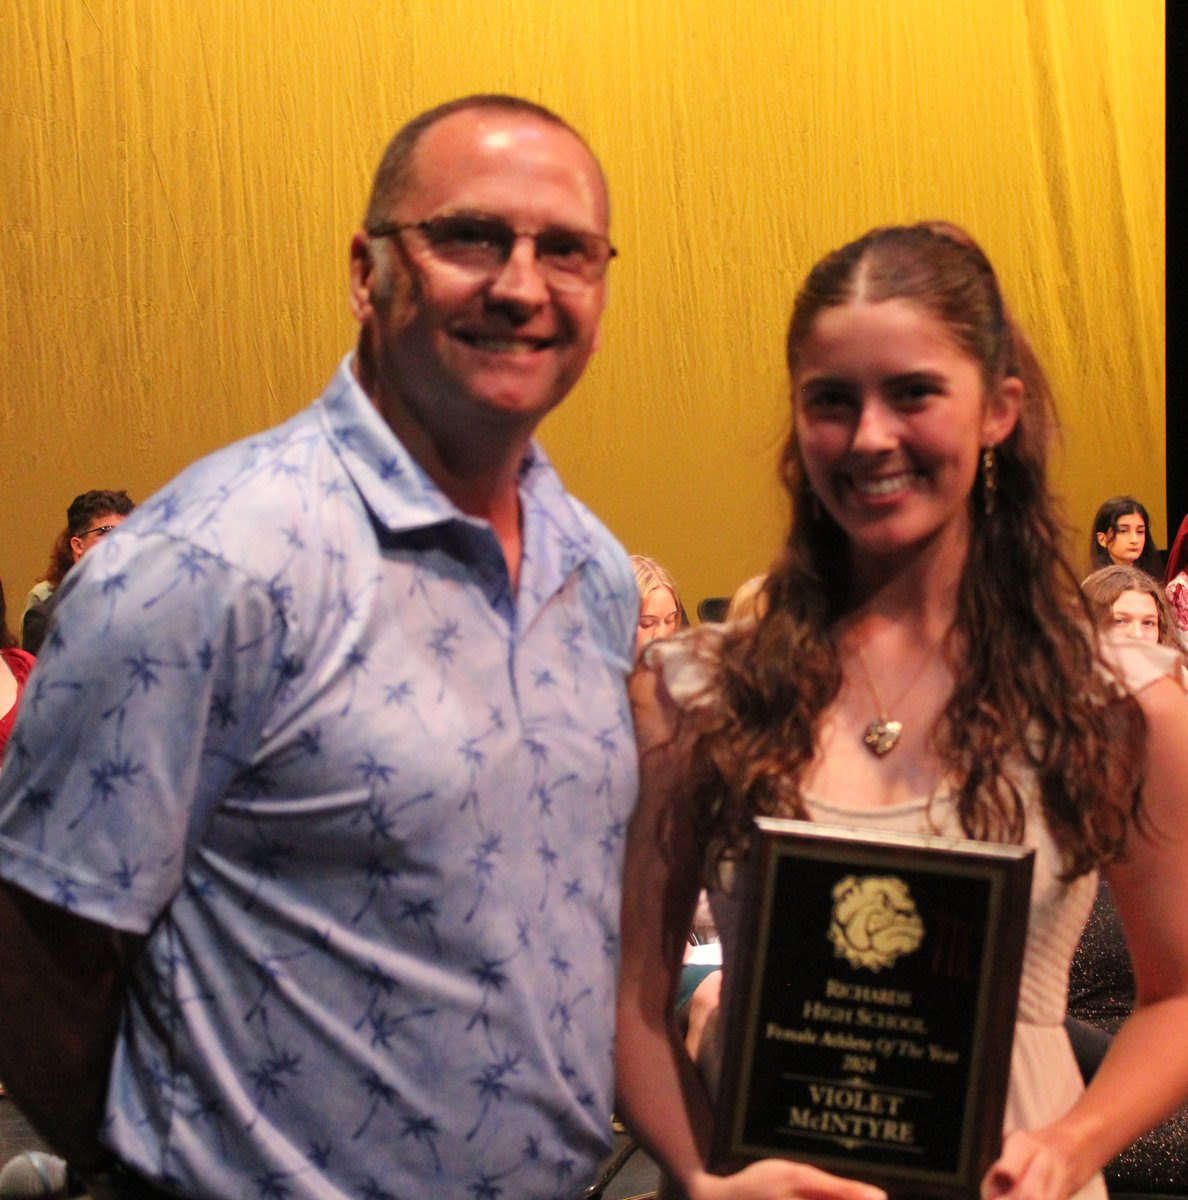 Congrats to Violet McIntyre, our Female Athlete of the Year. She earned All-SSC & qualified 2X in doubles for the IHSA state tennis finals. An AP Scholar, Violet earned All-SSC with @GOBULLDOGS_SB & shared the Christa Carbray Johnson Heart & Hustle Award w/Bridget Walsh.